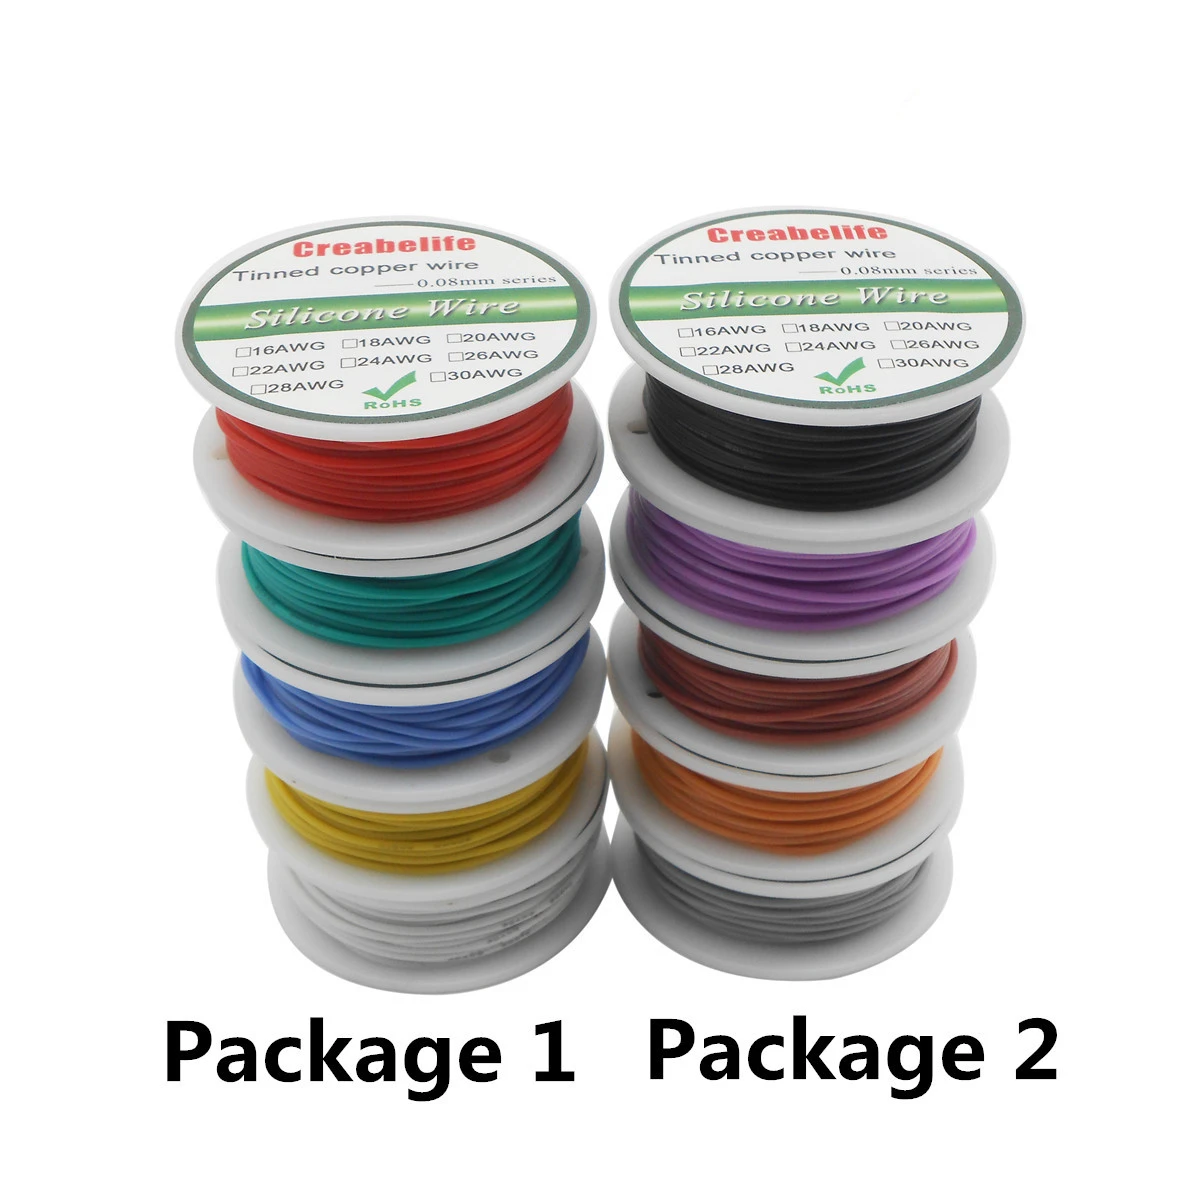 30/28/26/24/22/20/18awg Flexible Silicone Wire Cable wire 5 color Mix package